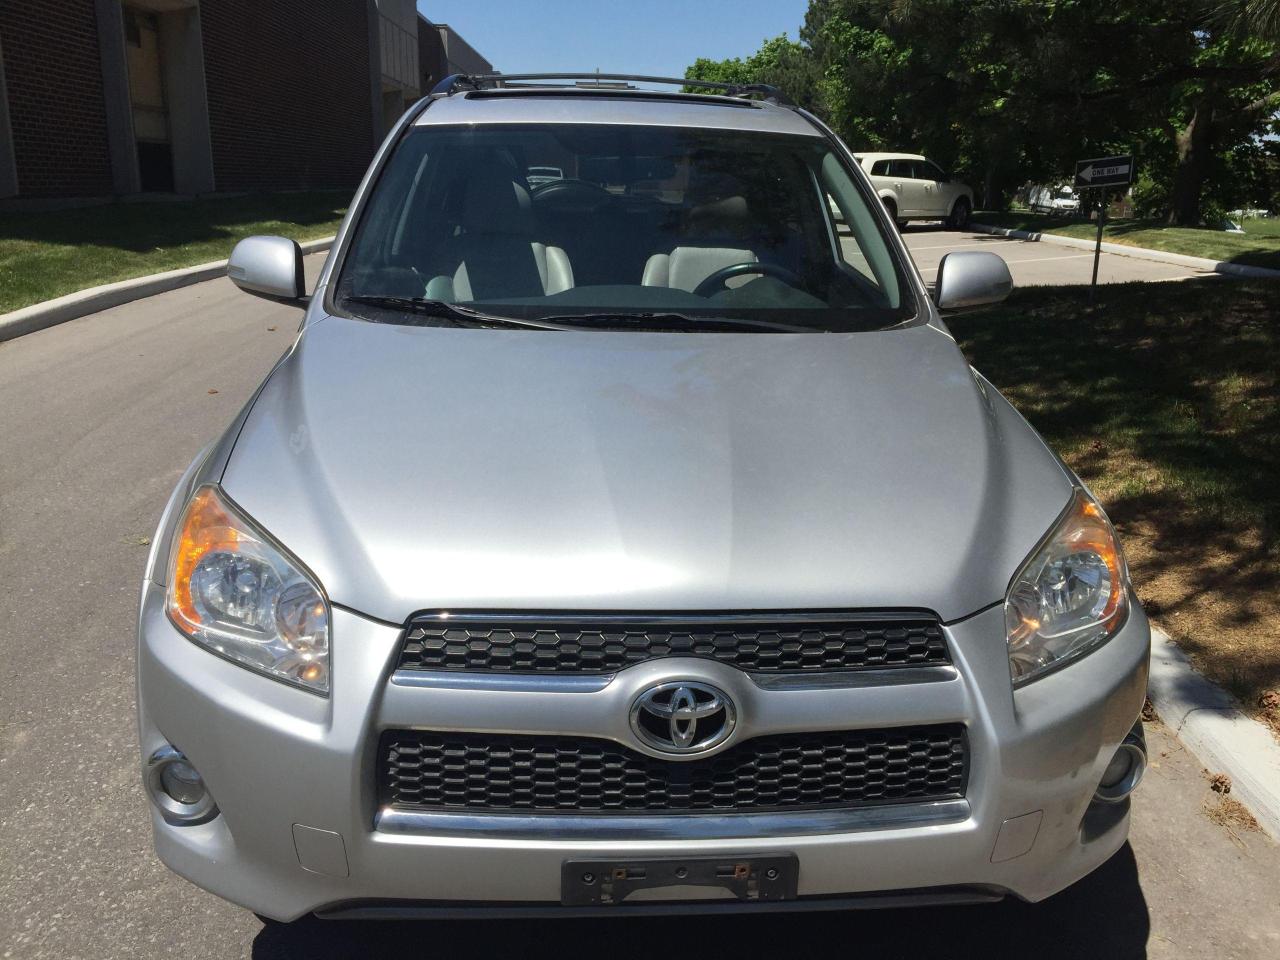 2009 Toyota RAV4 LIMITED - 1 LOCAL OWNER! NO CLAIMS! - Photo #20